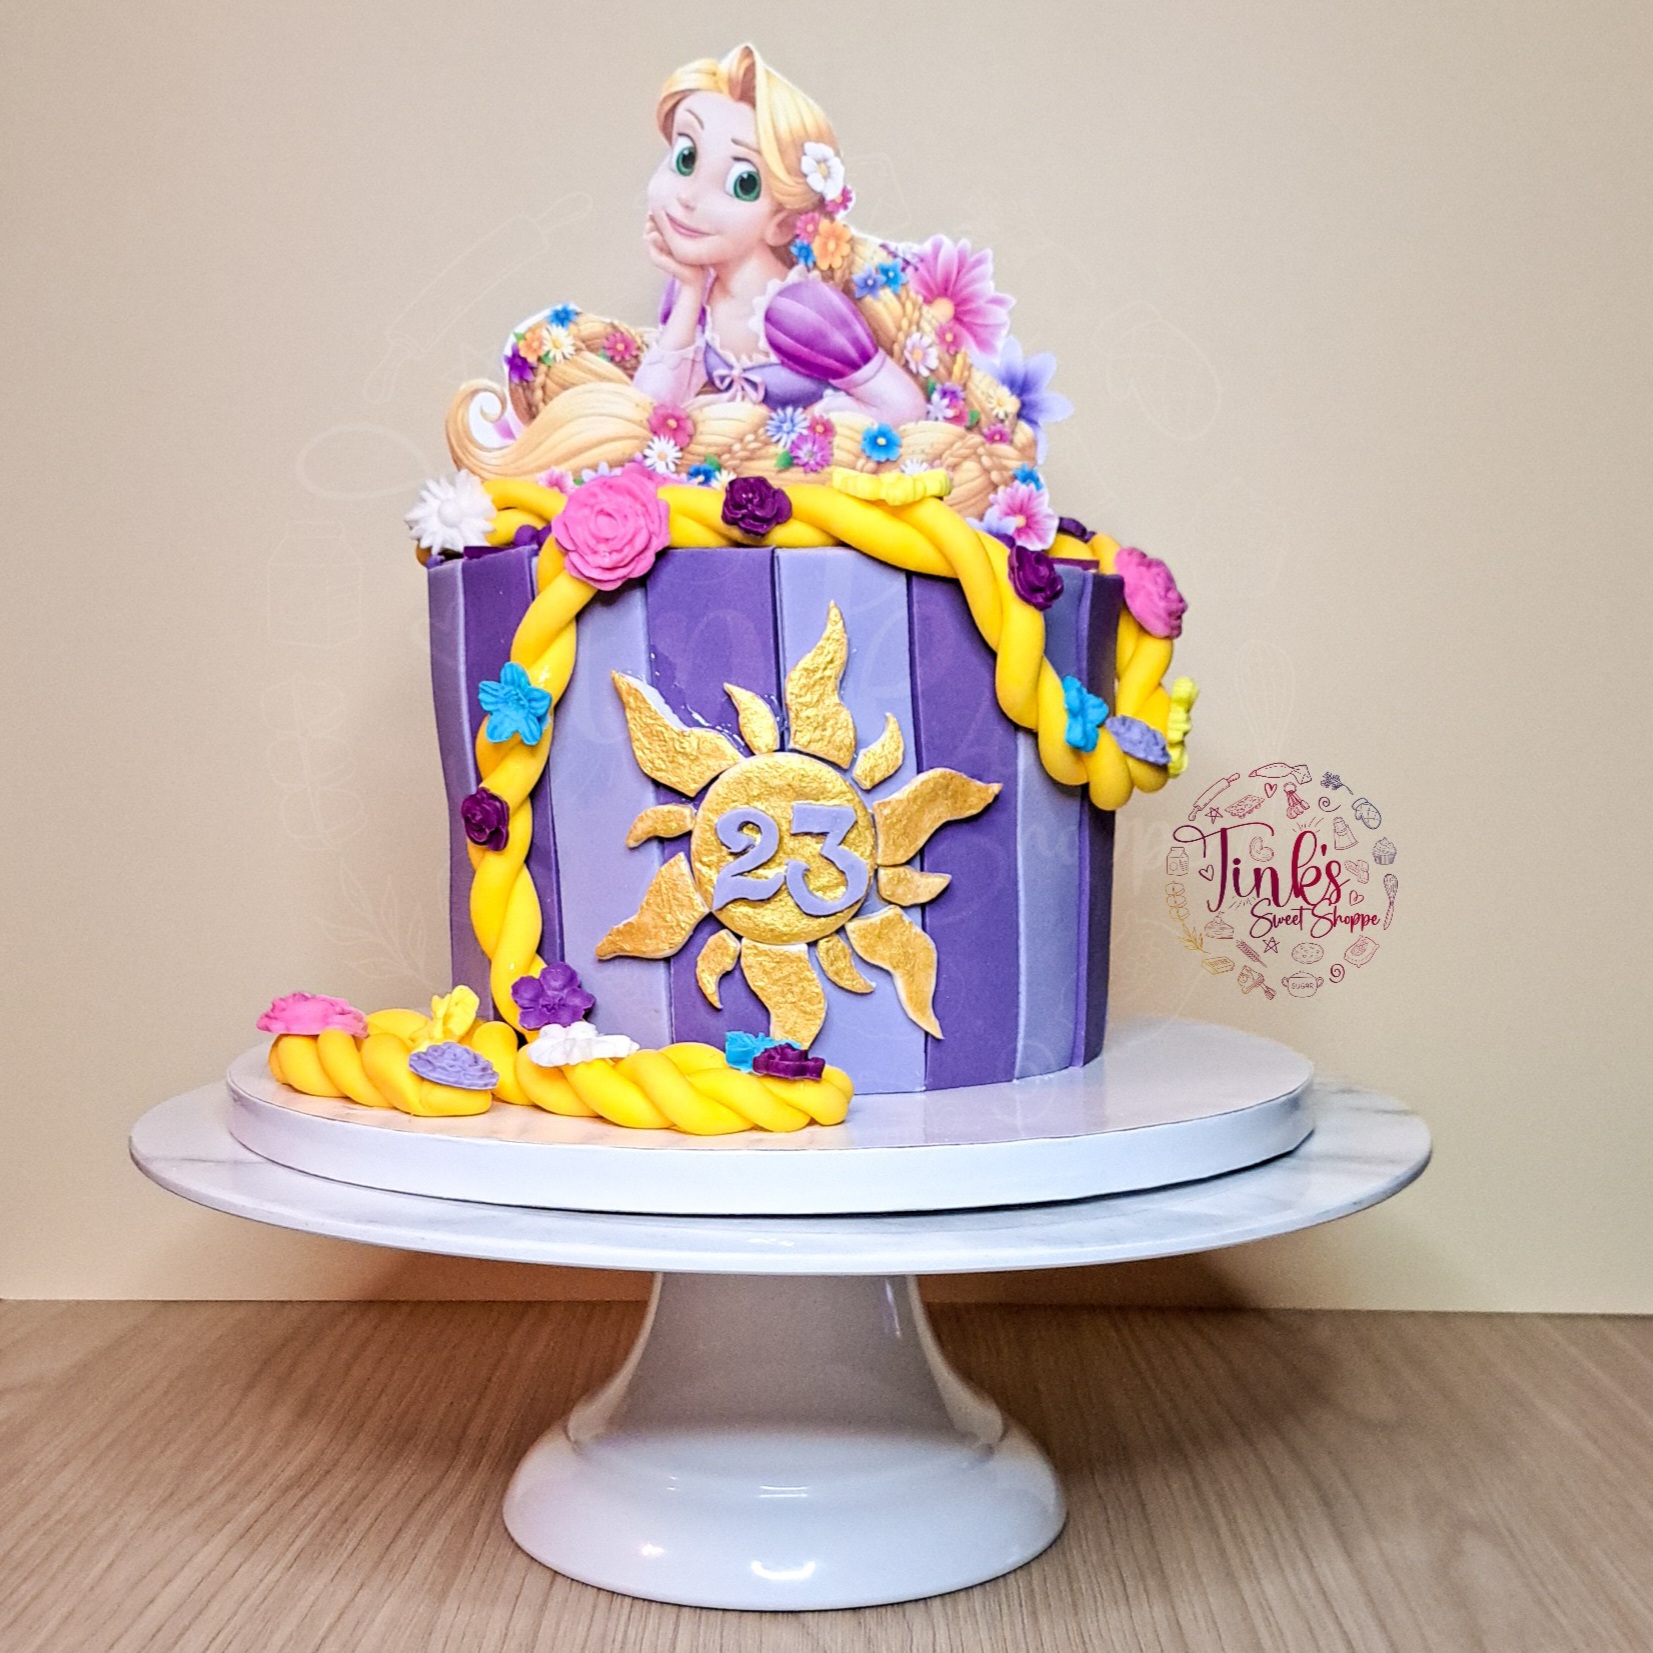 Making Sweet Things Happen: Tink’s Sweet Shoppe